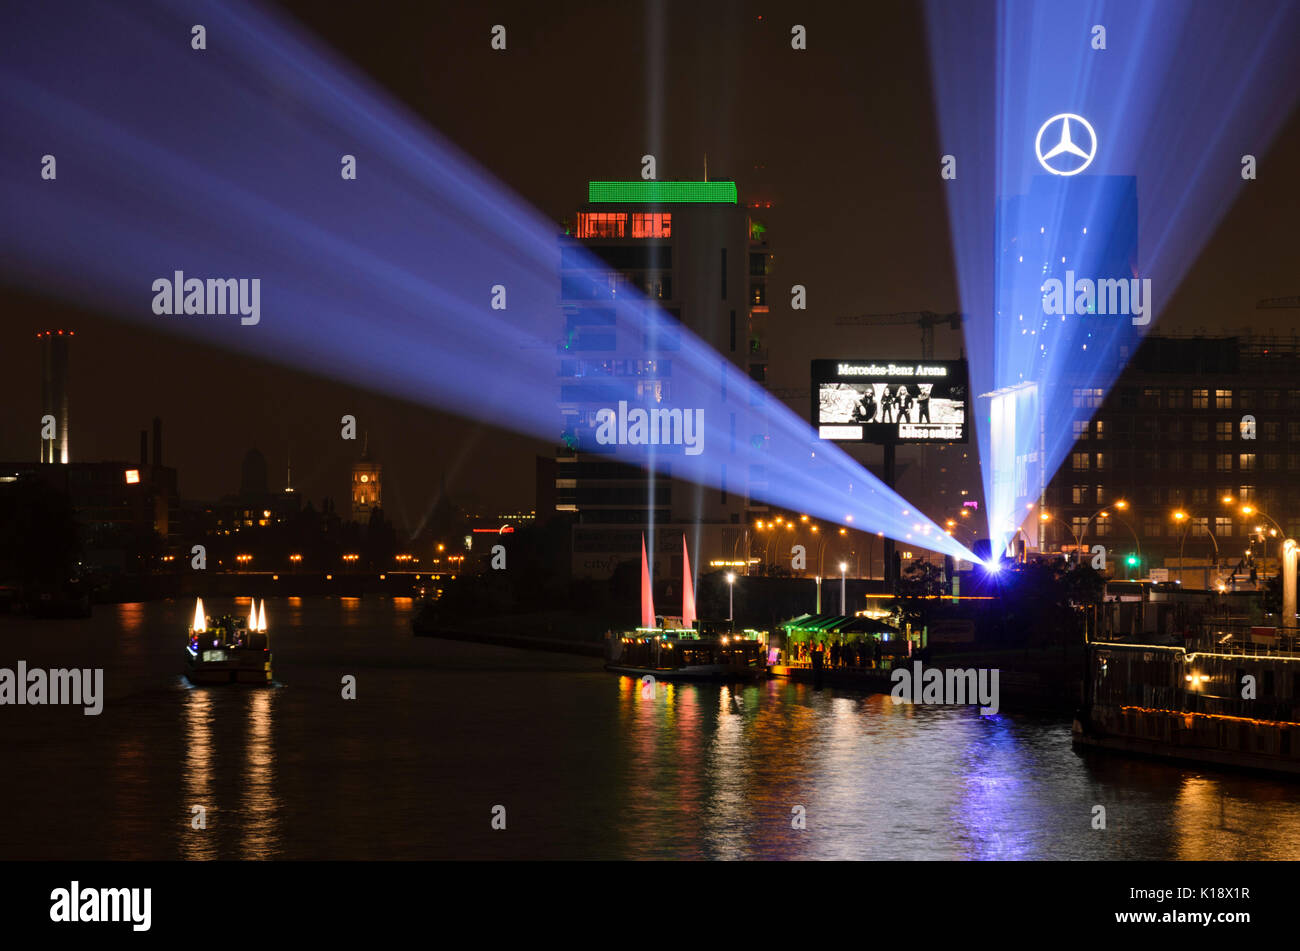 Light projection at Spree river, Berlin, Germany Stock Photo